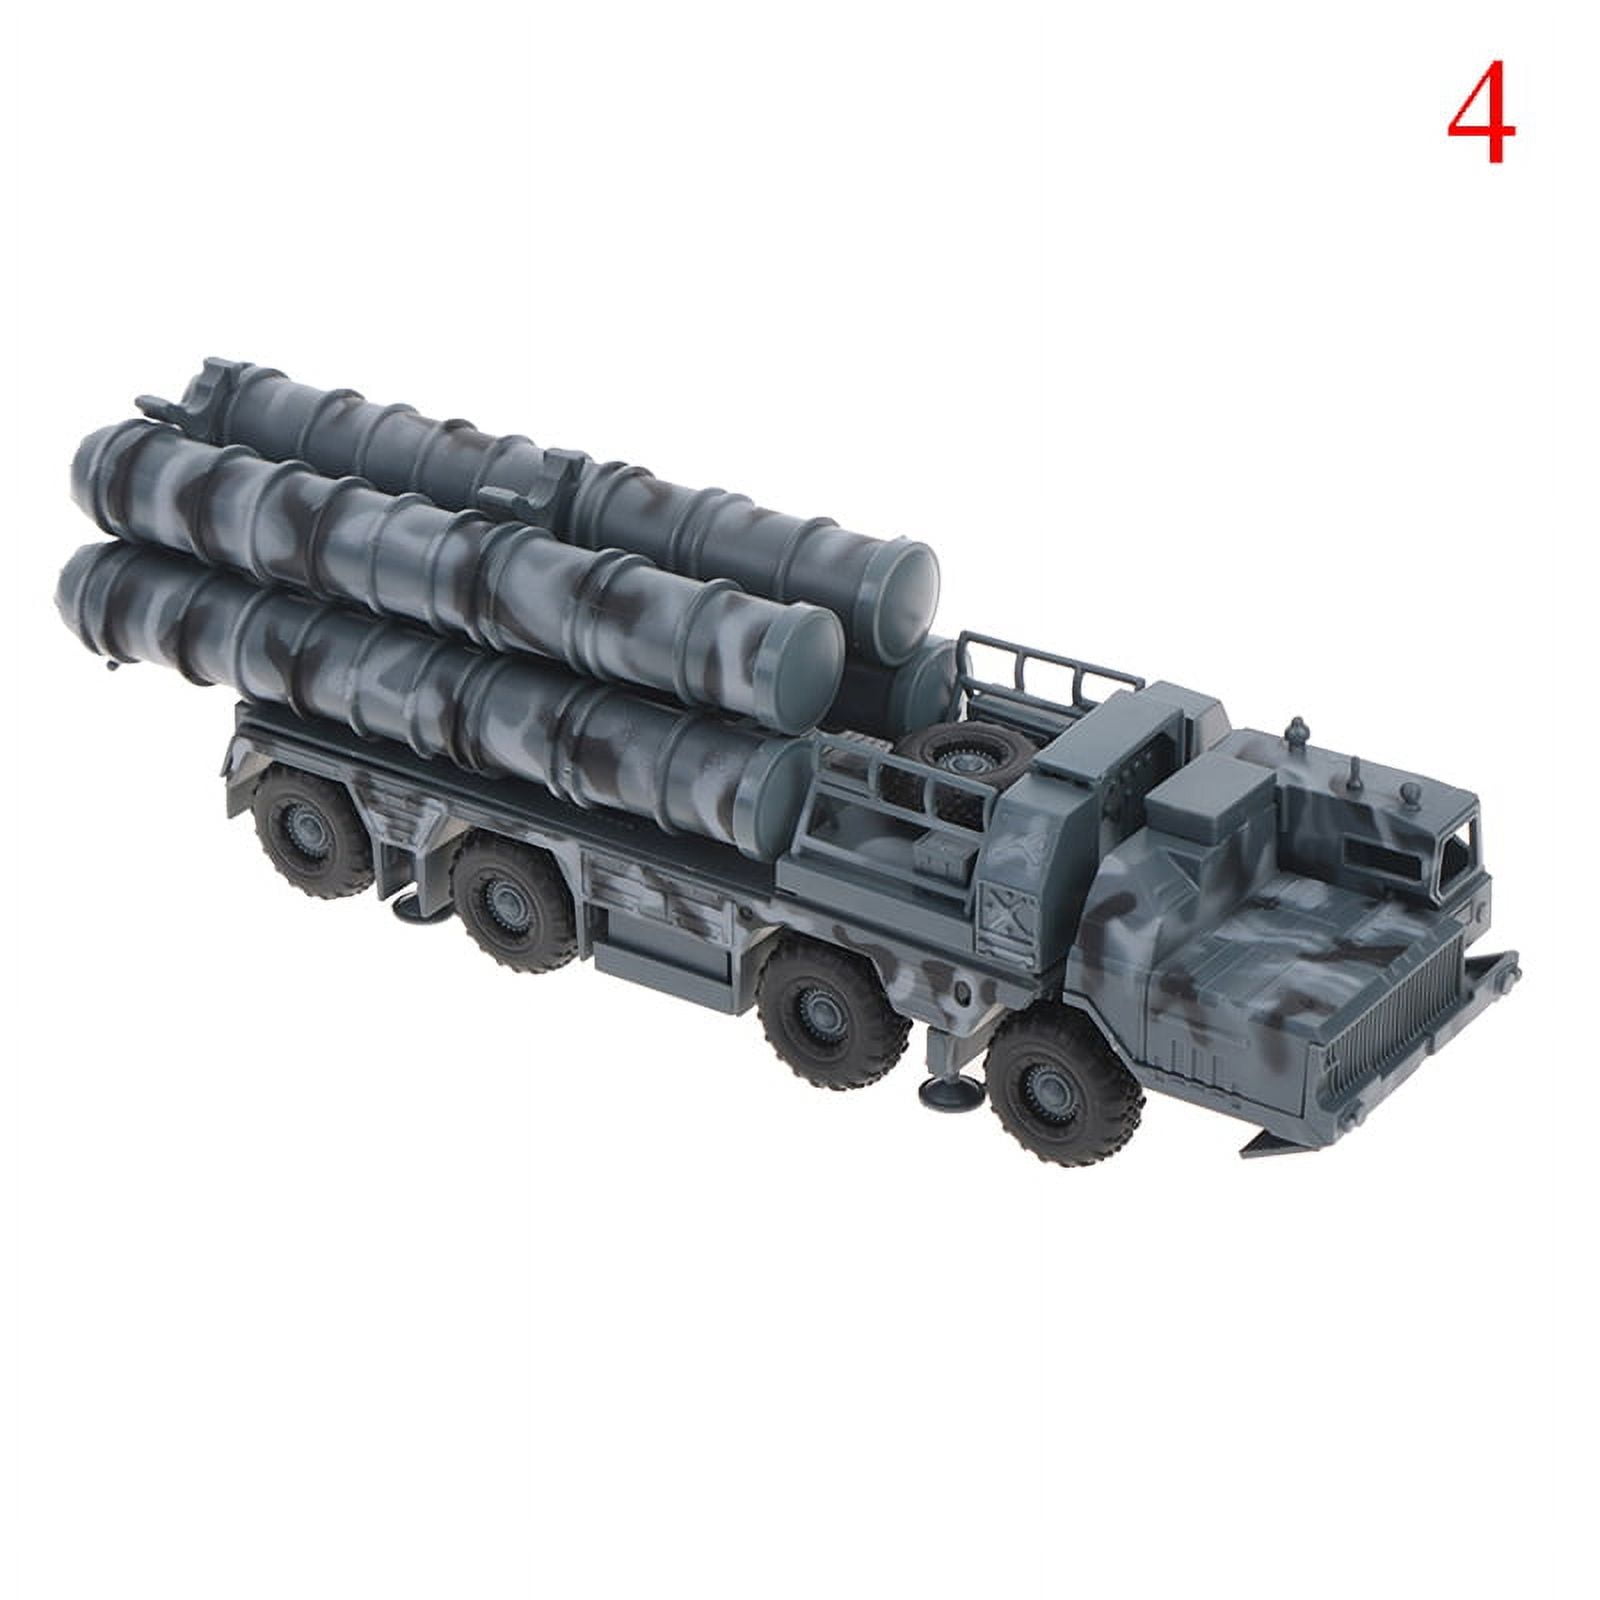 1:72Plastic Assembled Missile Launching Toys,S300 Ground-to-Air Missile  System 30N6E2 Radar Car, Educational Toys, Free Shipping - AliExpress